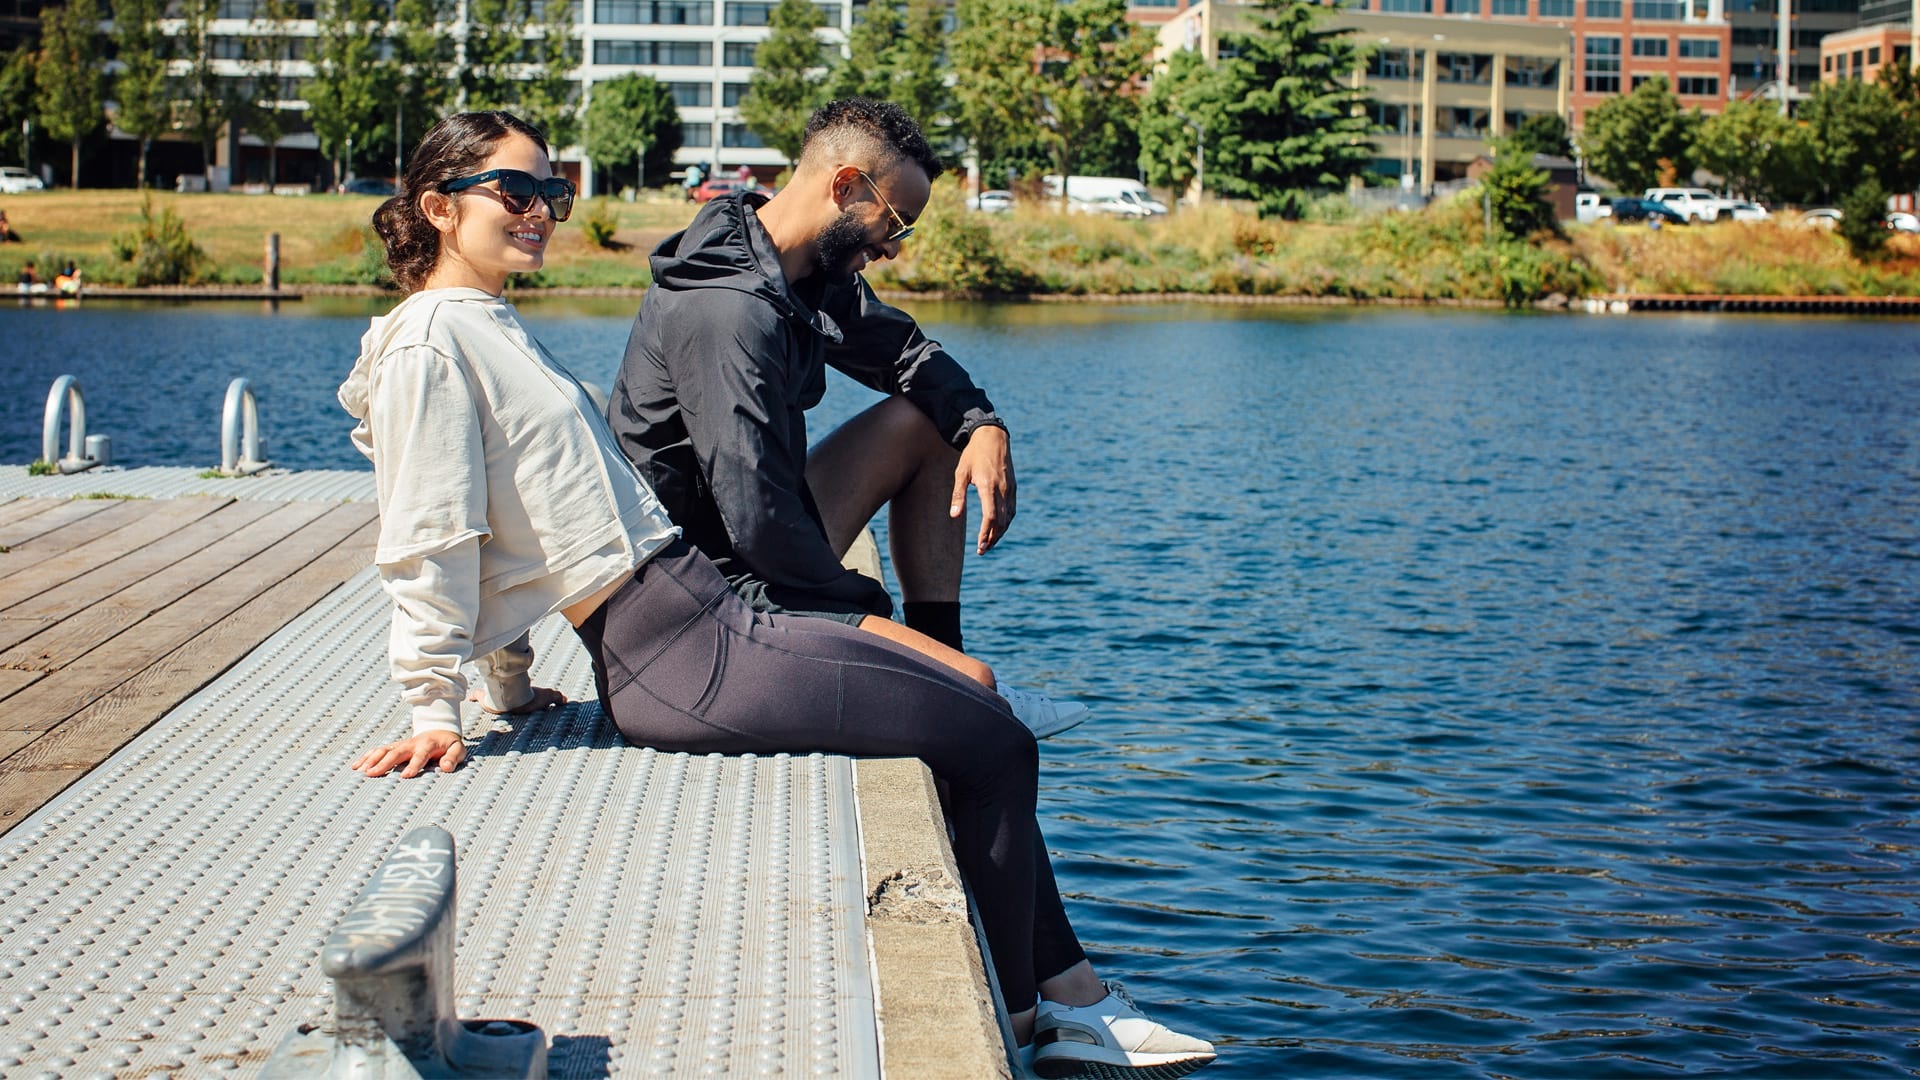 Couple relaxing by the water in Seattle, WA